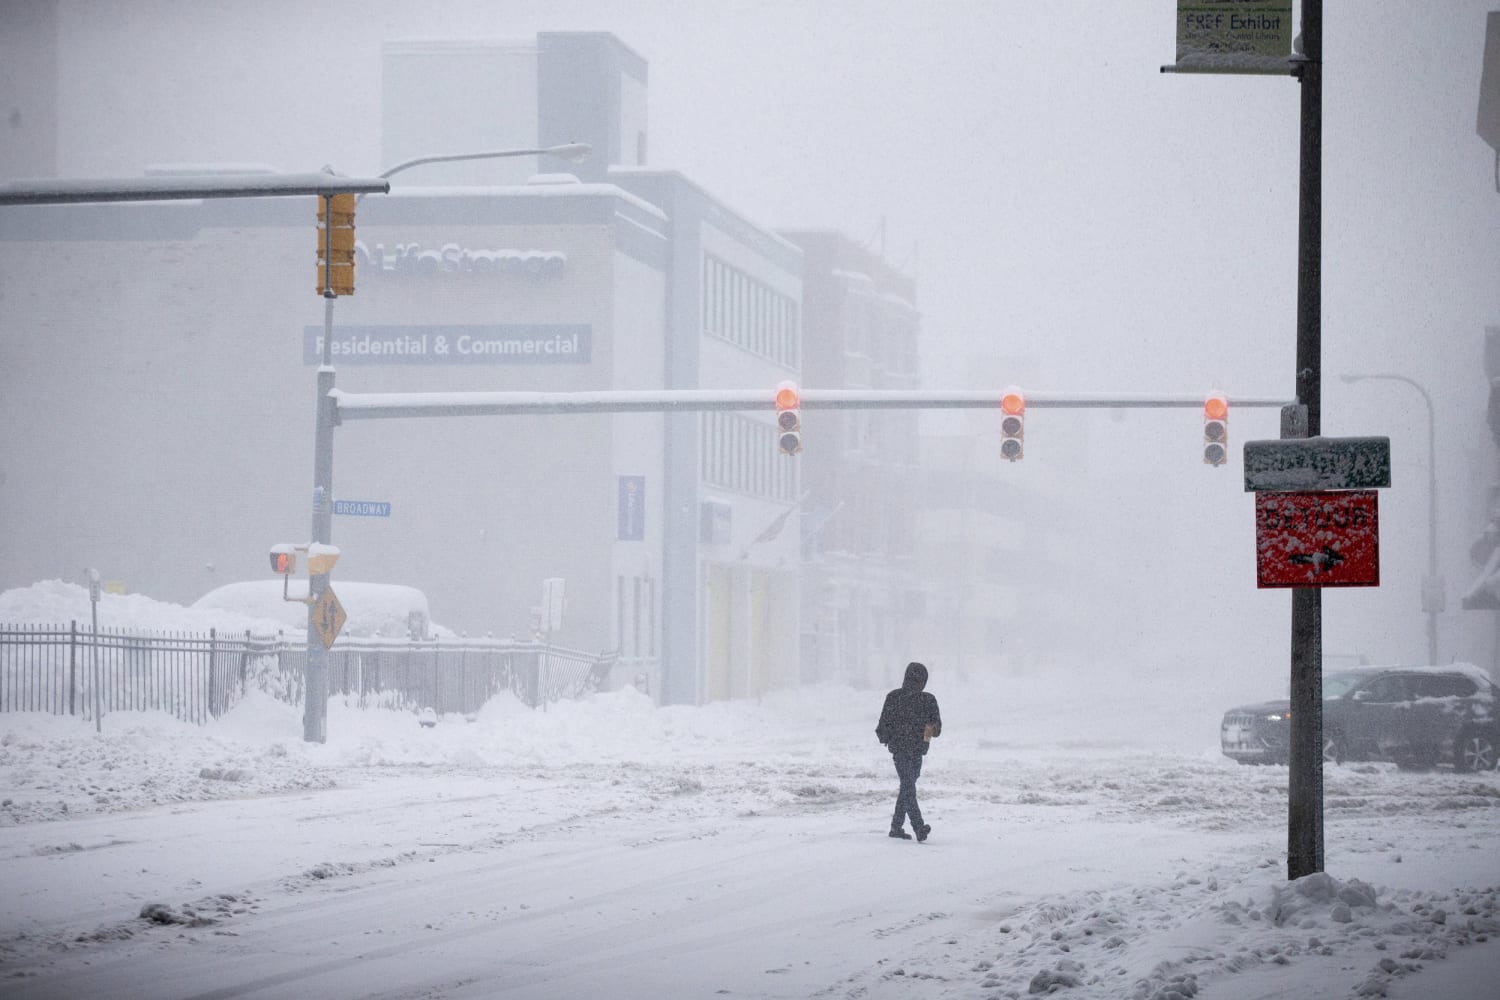 2 dead after shoveling heavy snow as winter storm batters Upstate New York